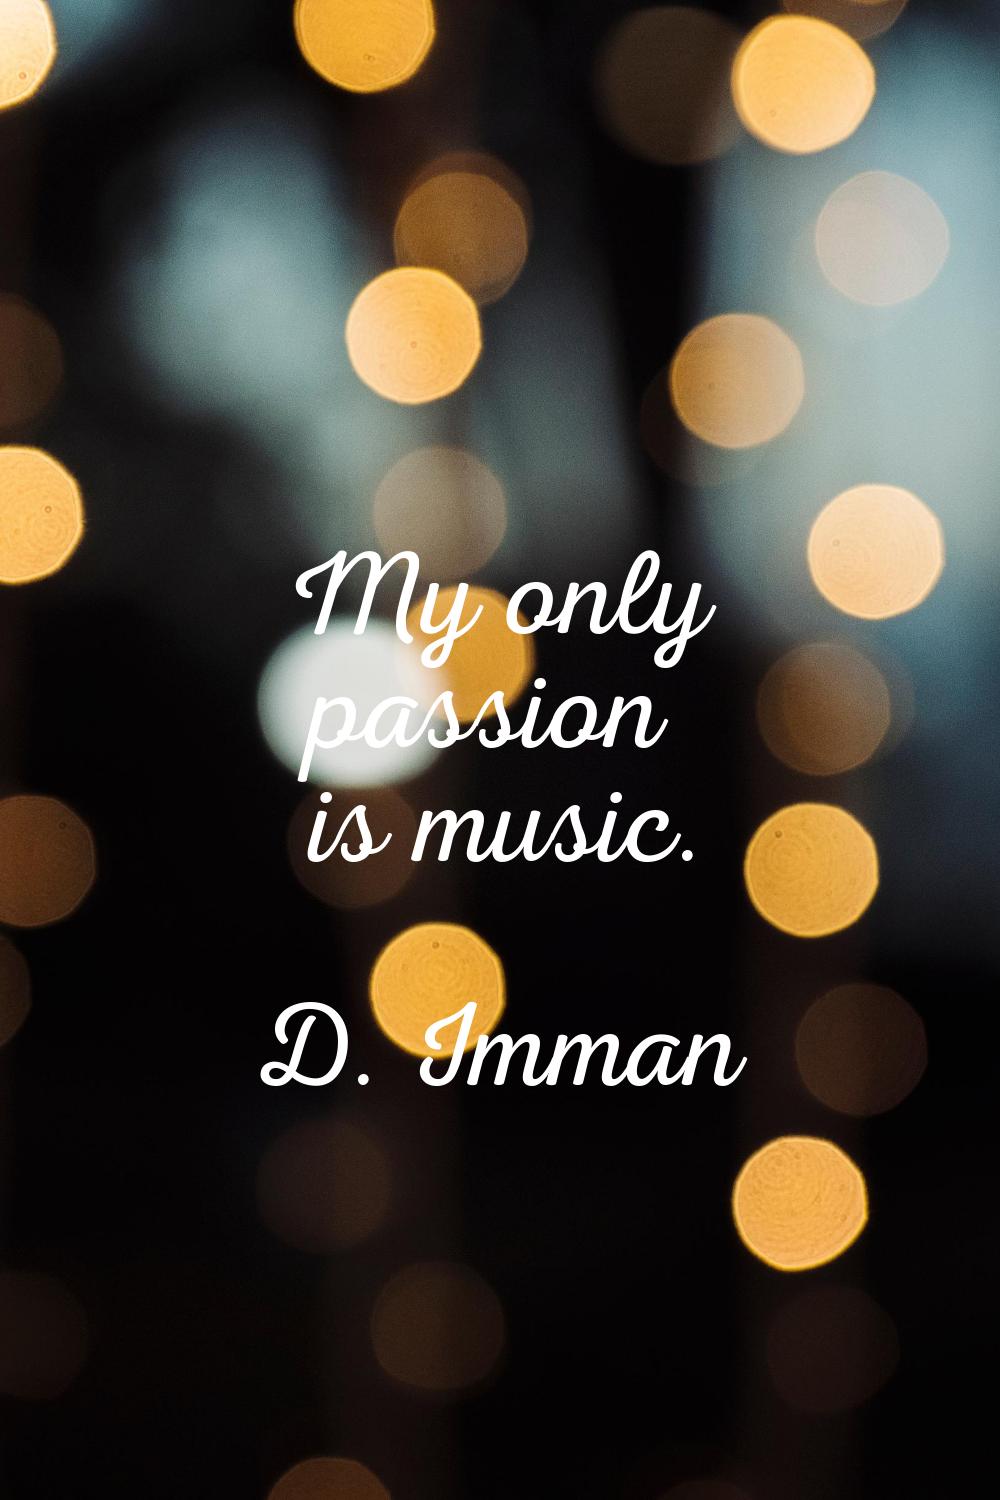 My only passion is music.